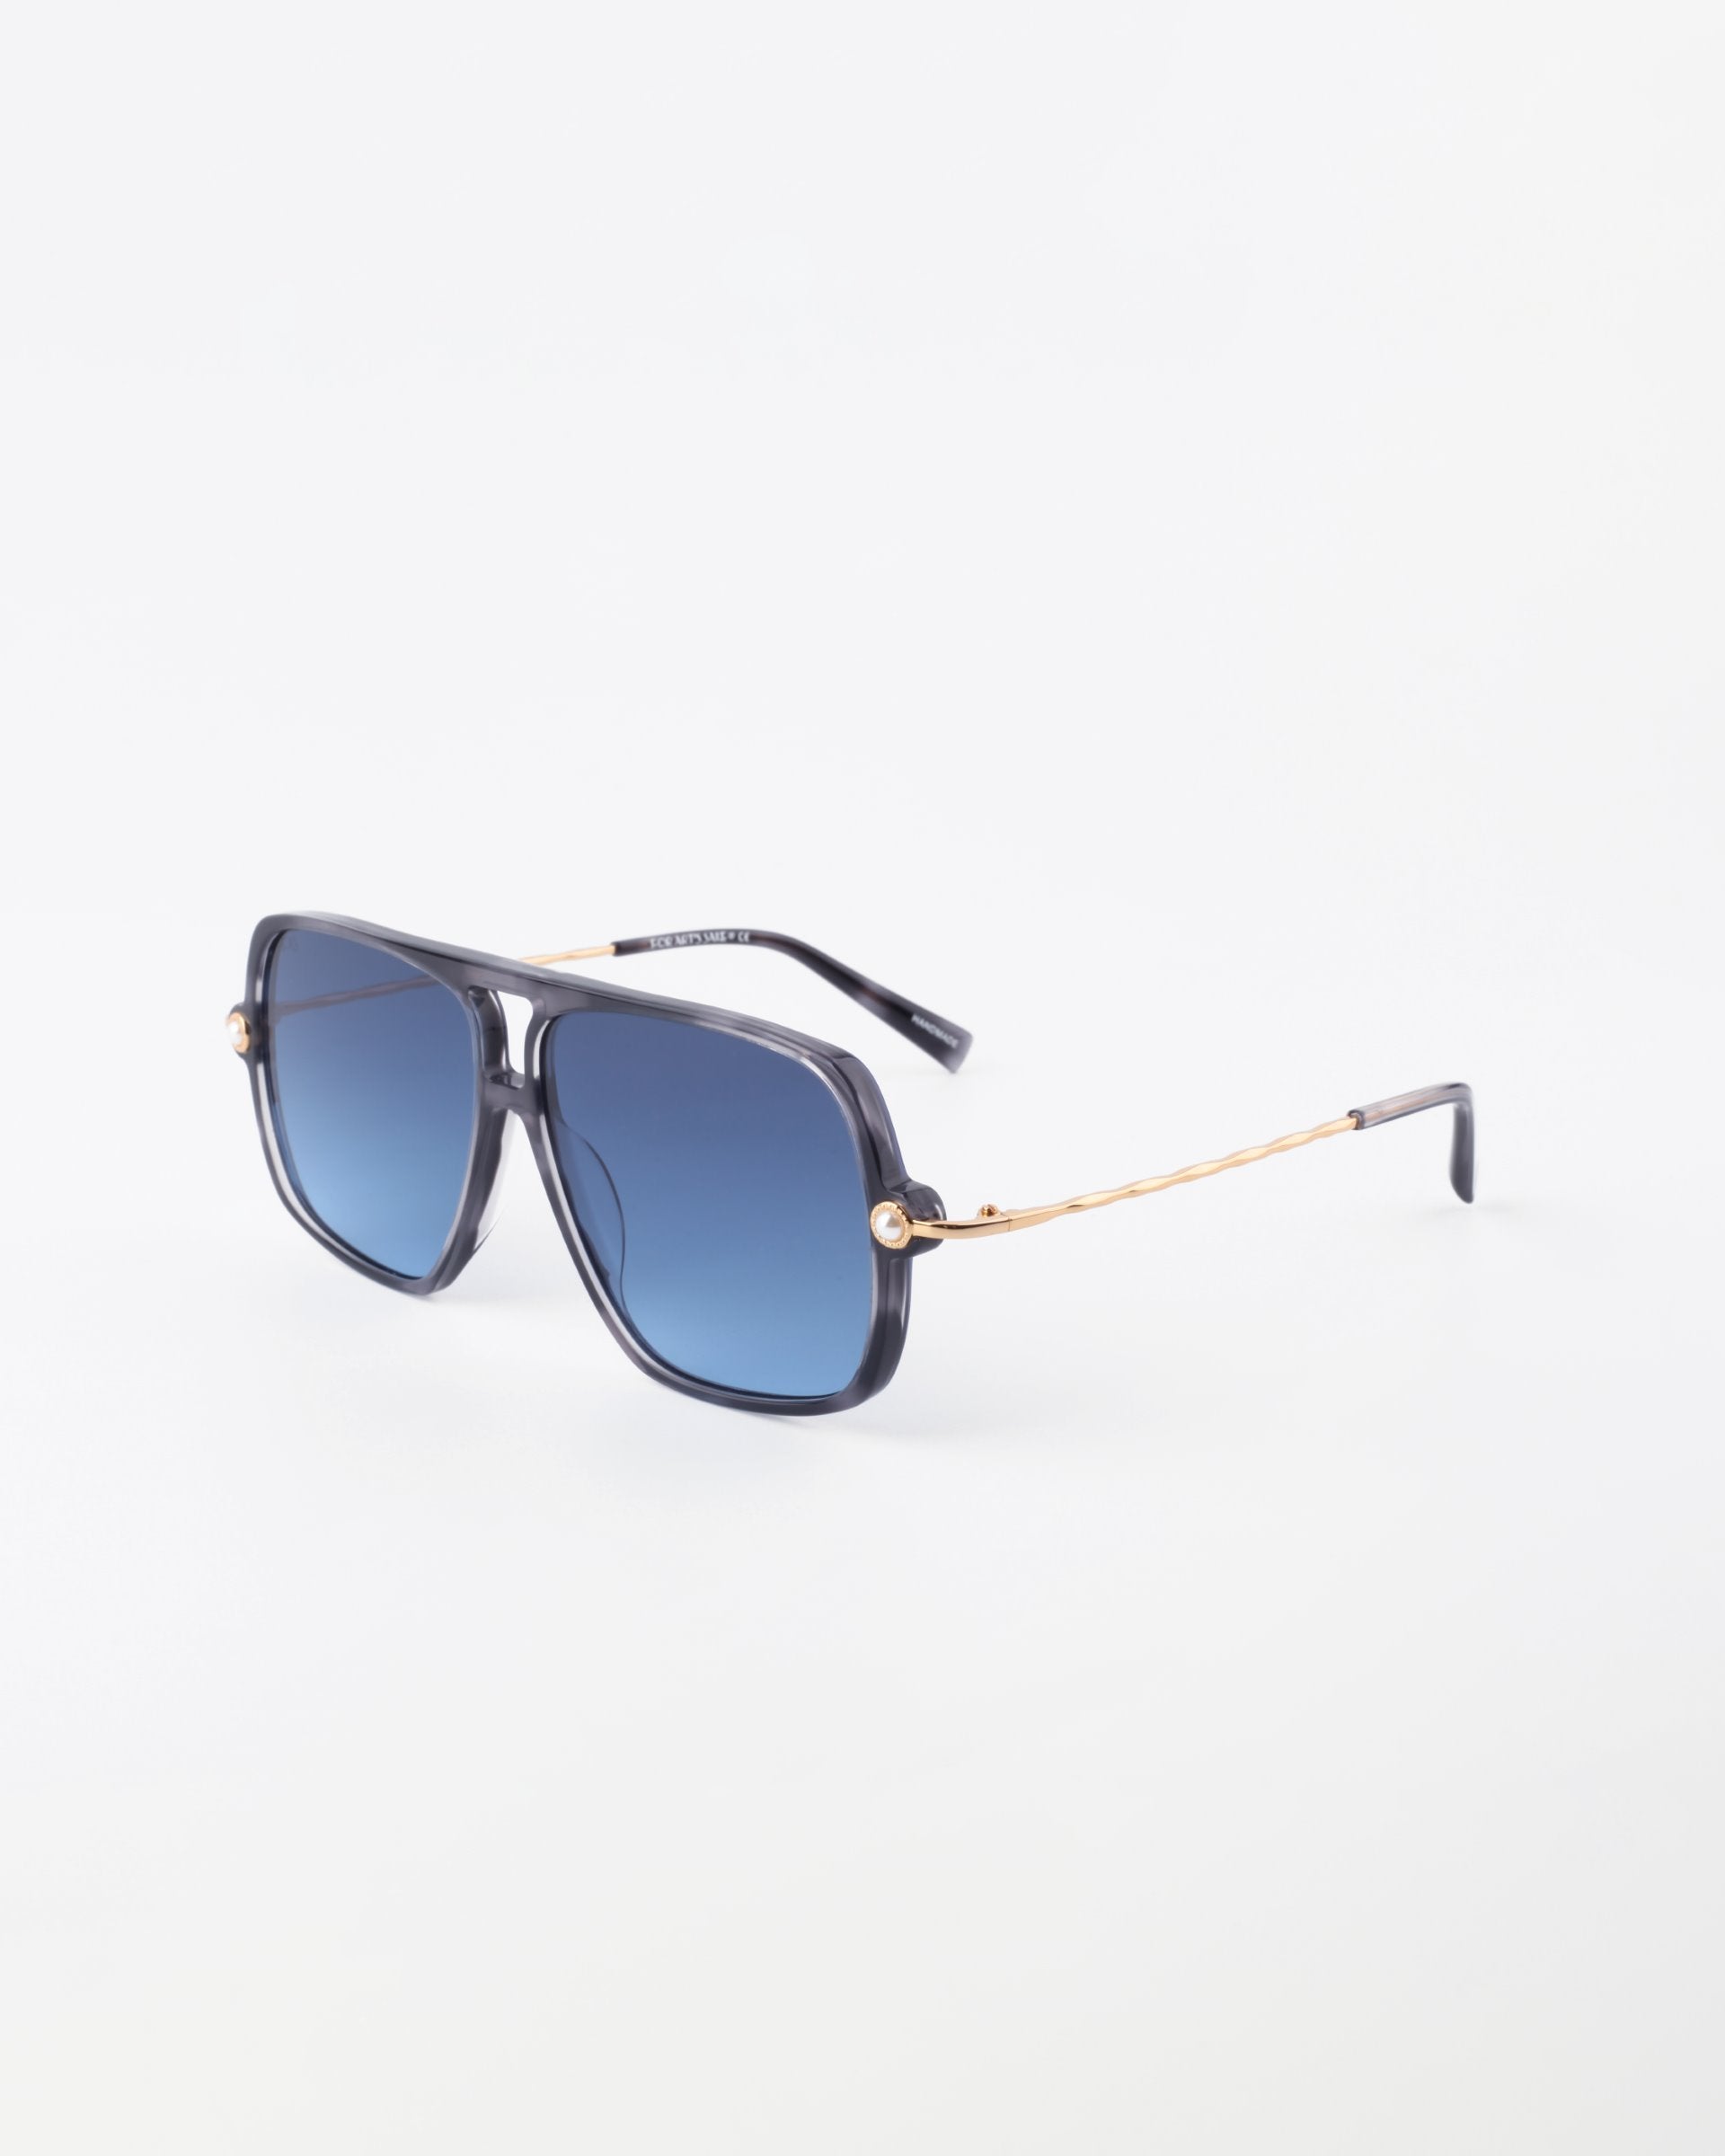 A pair of stylish sunglasses with black square frames, 18-karat gold-plated temples, and blue gradient lenses. The design features thin, wavy gold lines along the arms and small decorative elements near the hinges, adding a touch of elegance to the eyewear. This is *Cinnamon* by *For Art&#39;s Sake®*.